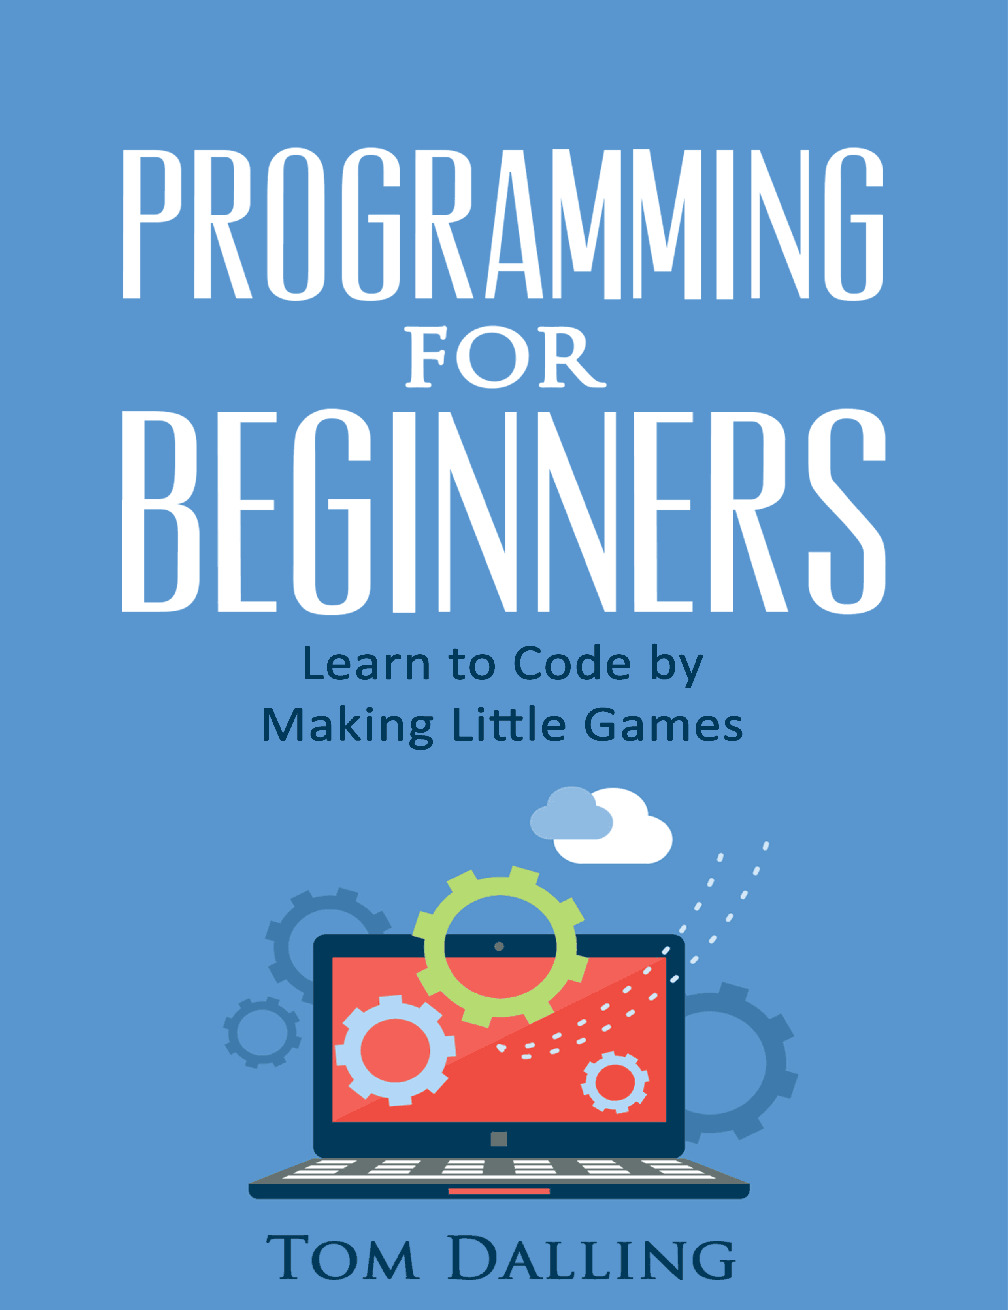 Programming for Beginners Learn to Code by Making Little Games – Tom Dalling